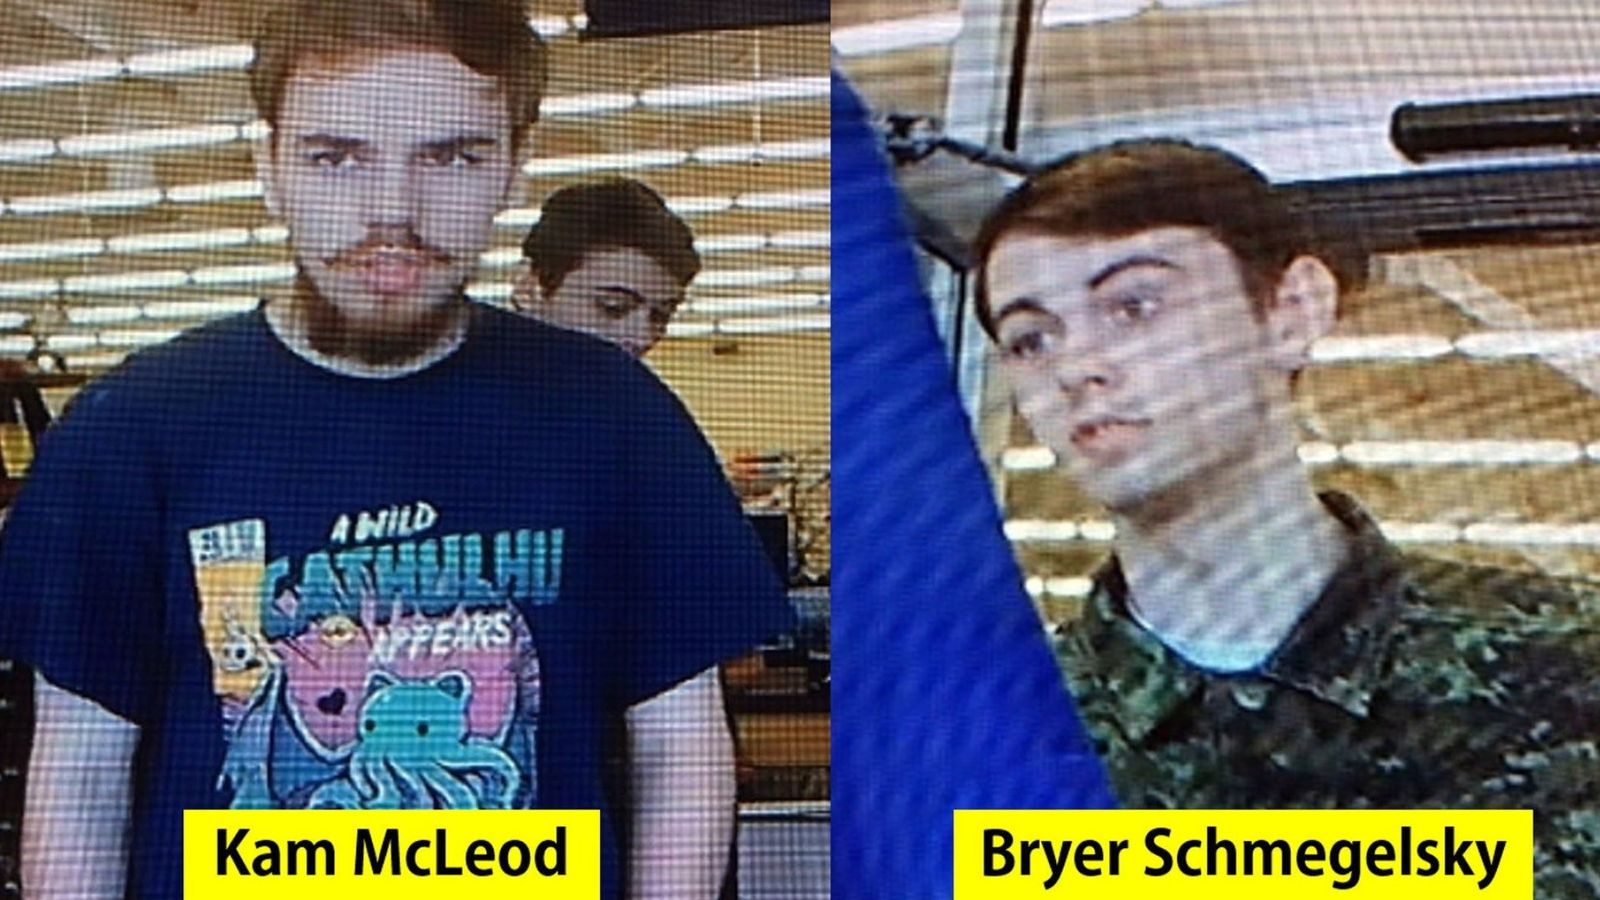 Foto: Canadian police request public's assistance in locating suspects connected to northern british columbia investigations